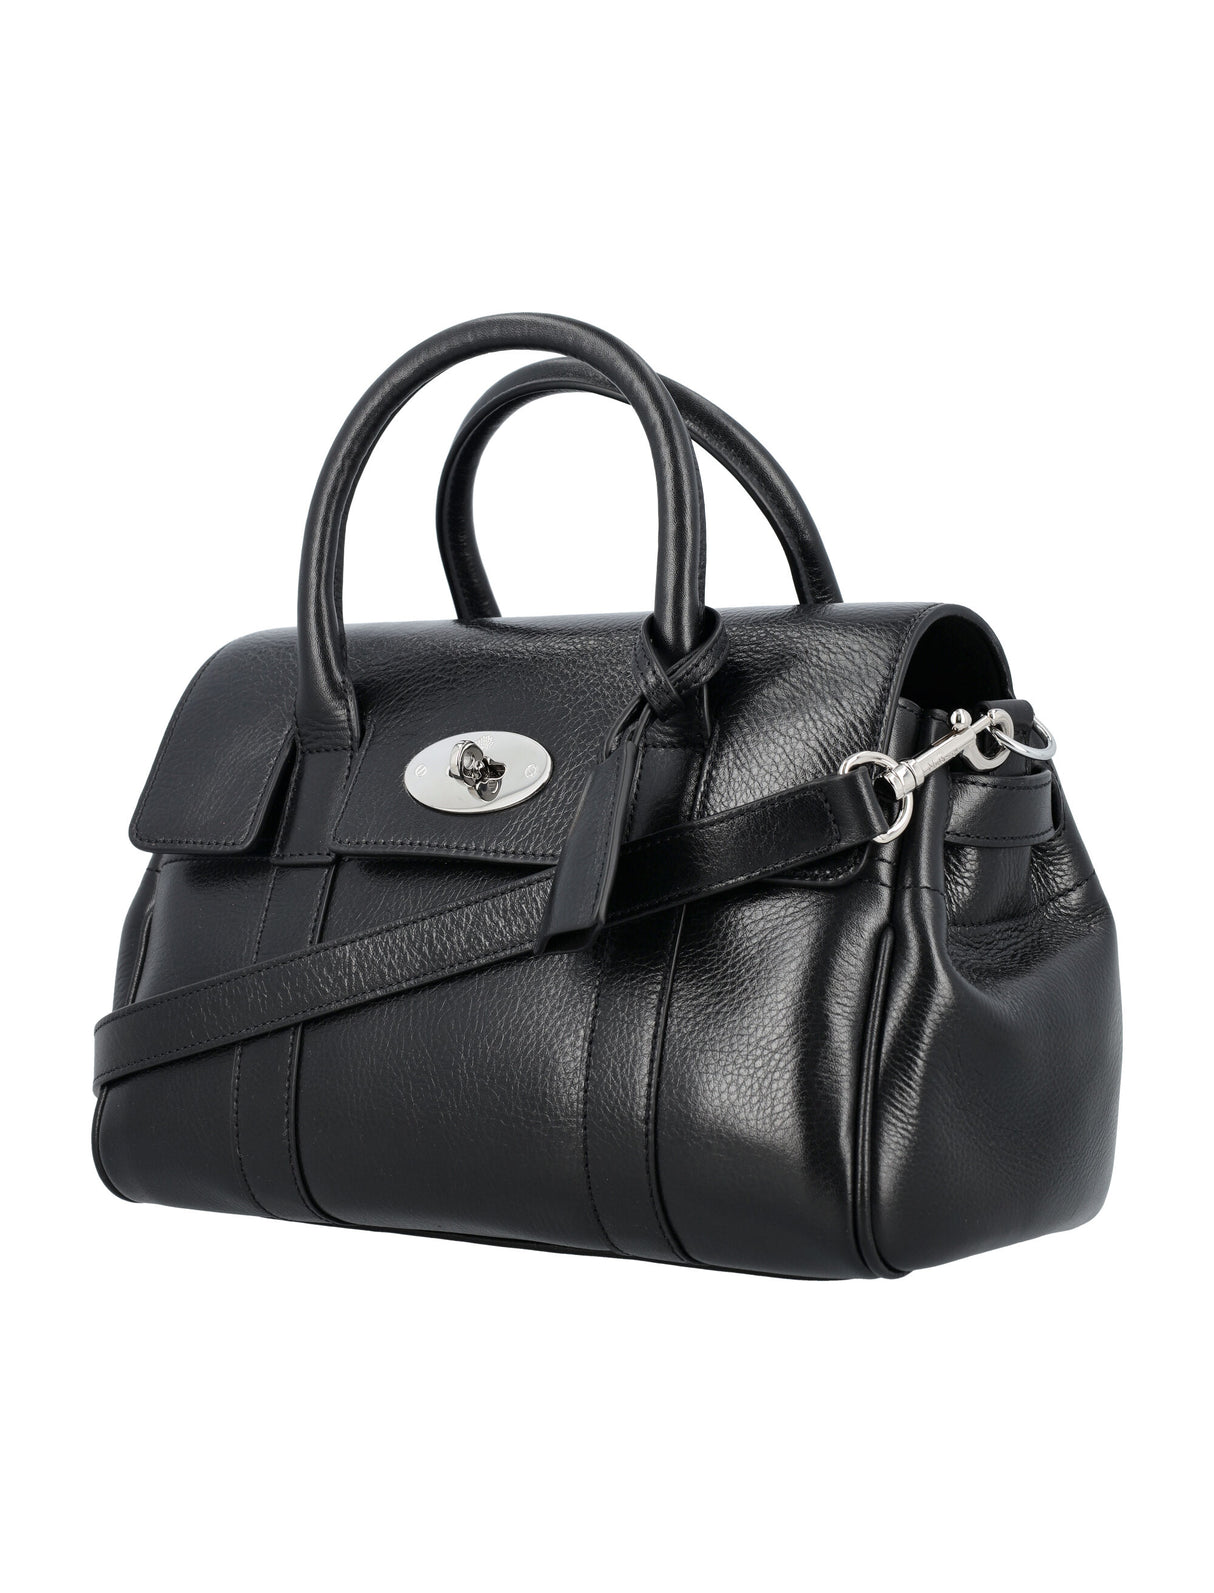 MULBERRY Chic Black Leather Mini Bayswater Satchel with Silver-Tone Accents (27x16x14 cm)